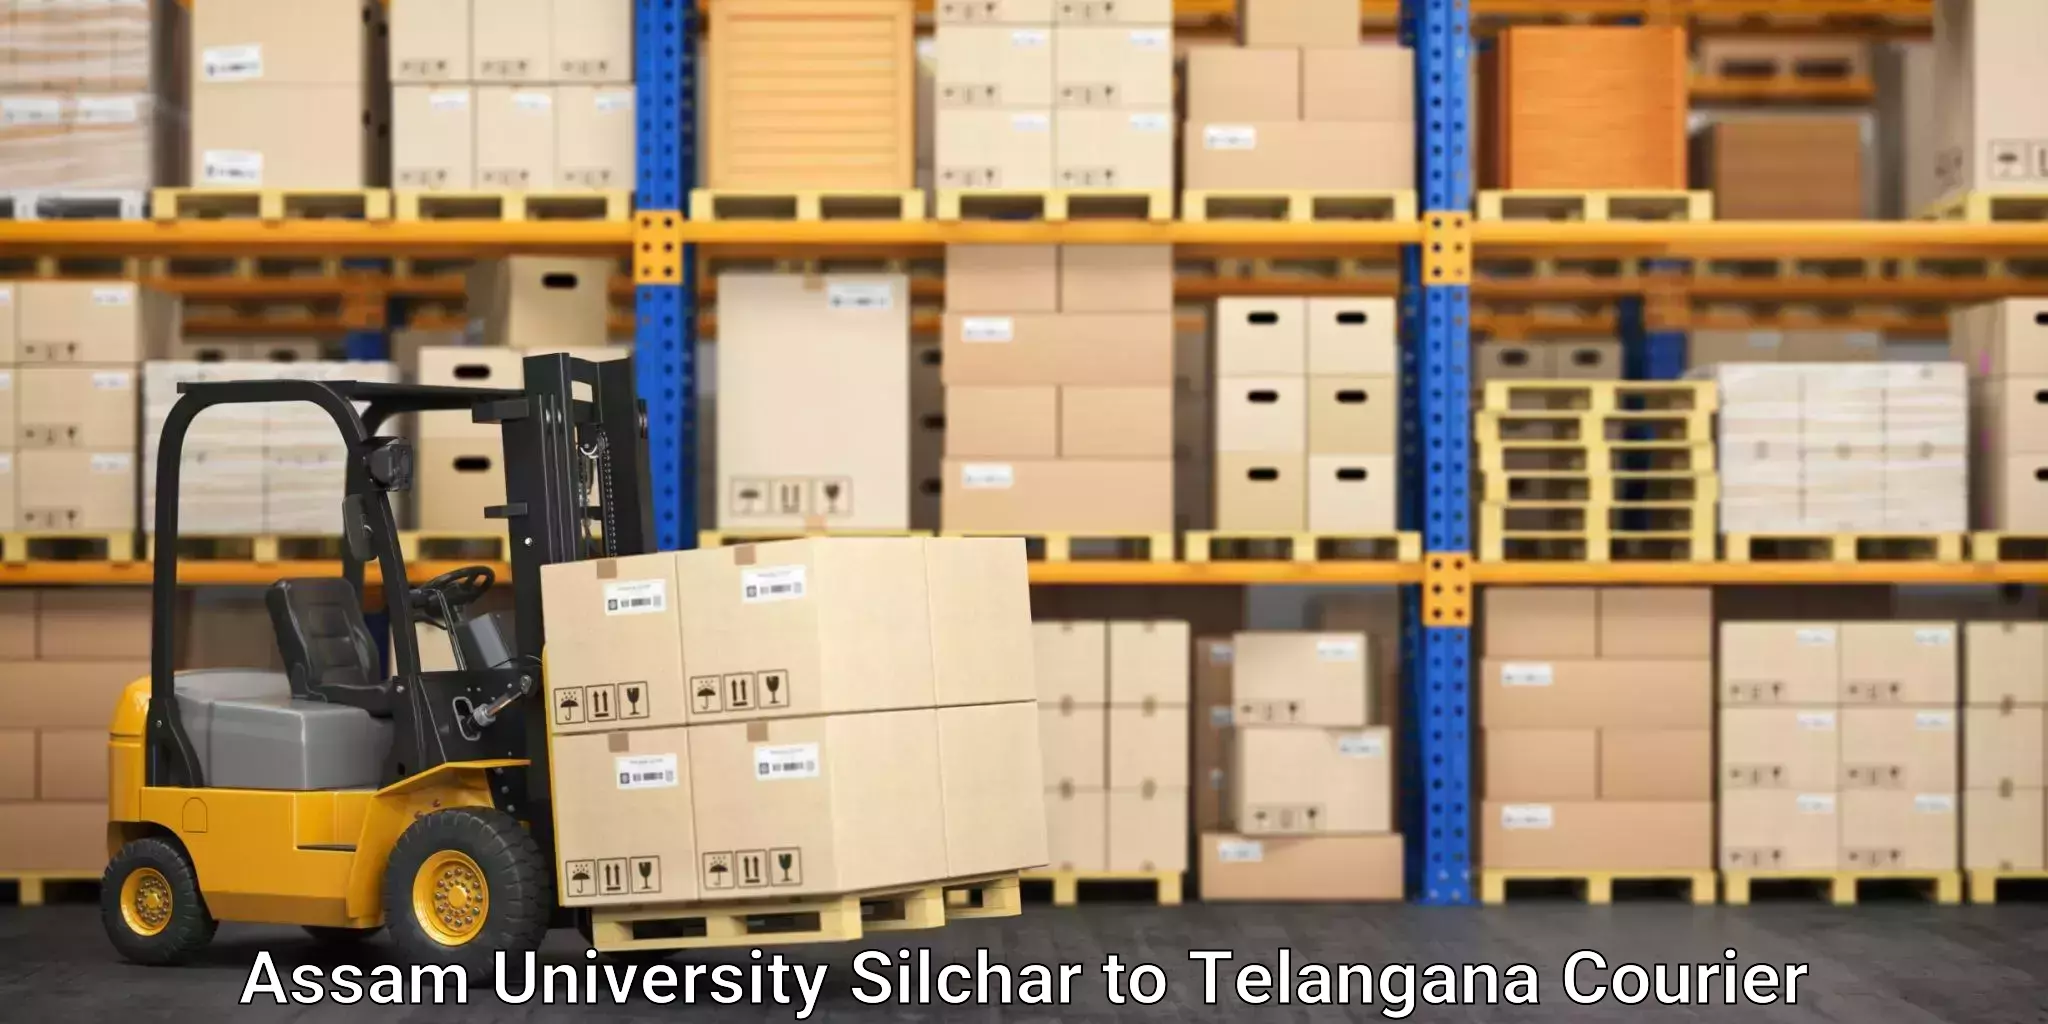 Secure freight services Assam University Silchar to Telangana